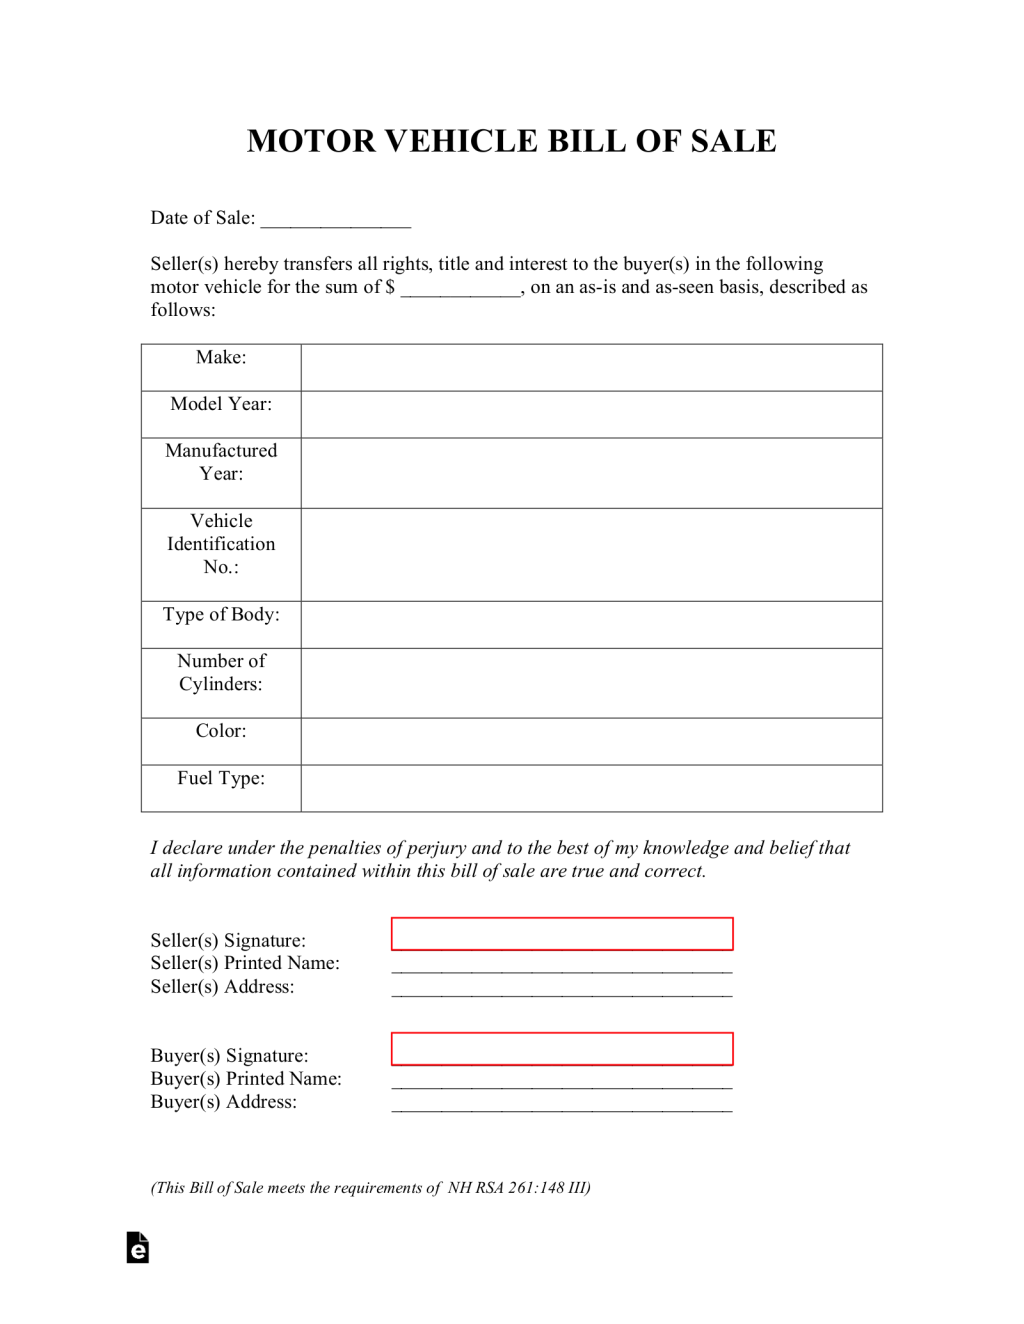 Picture of: Free New Hampshire Motor Vehicle Bill of Sale Form – PDF – eForms